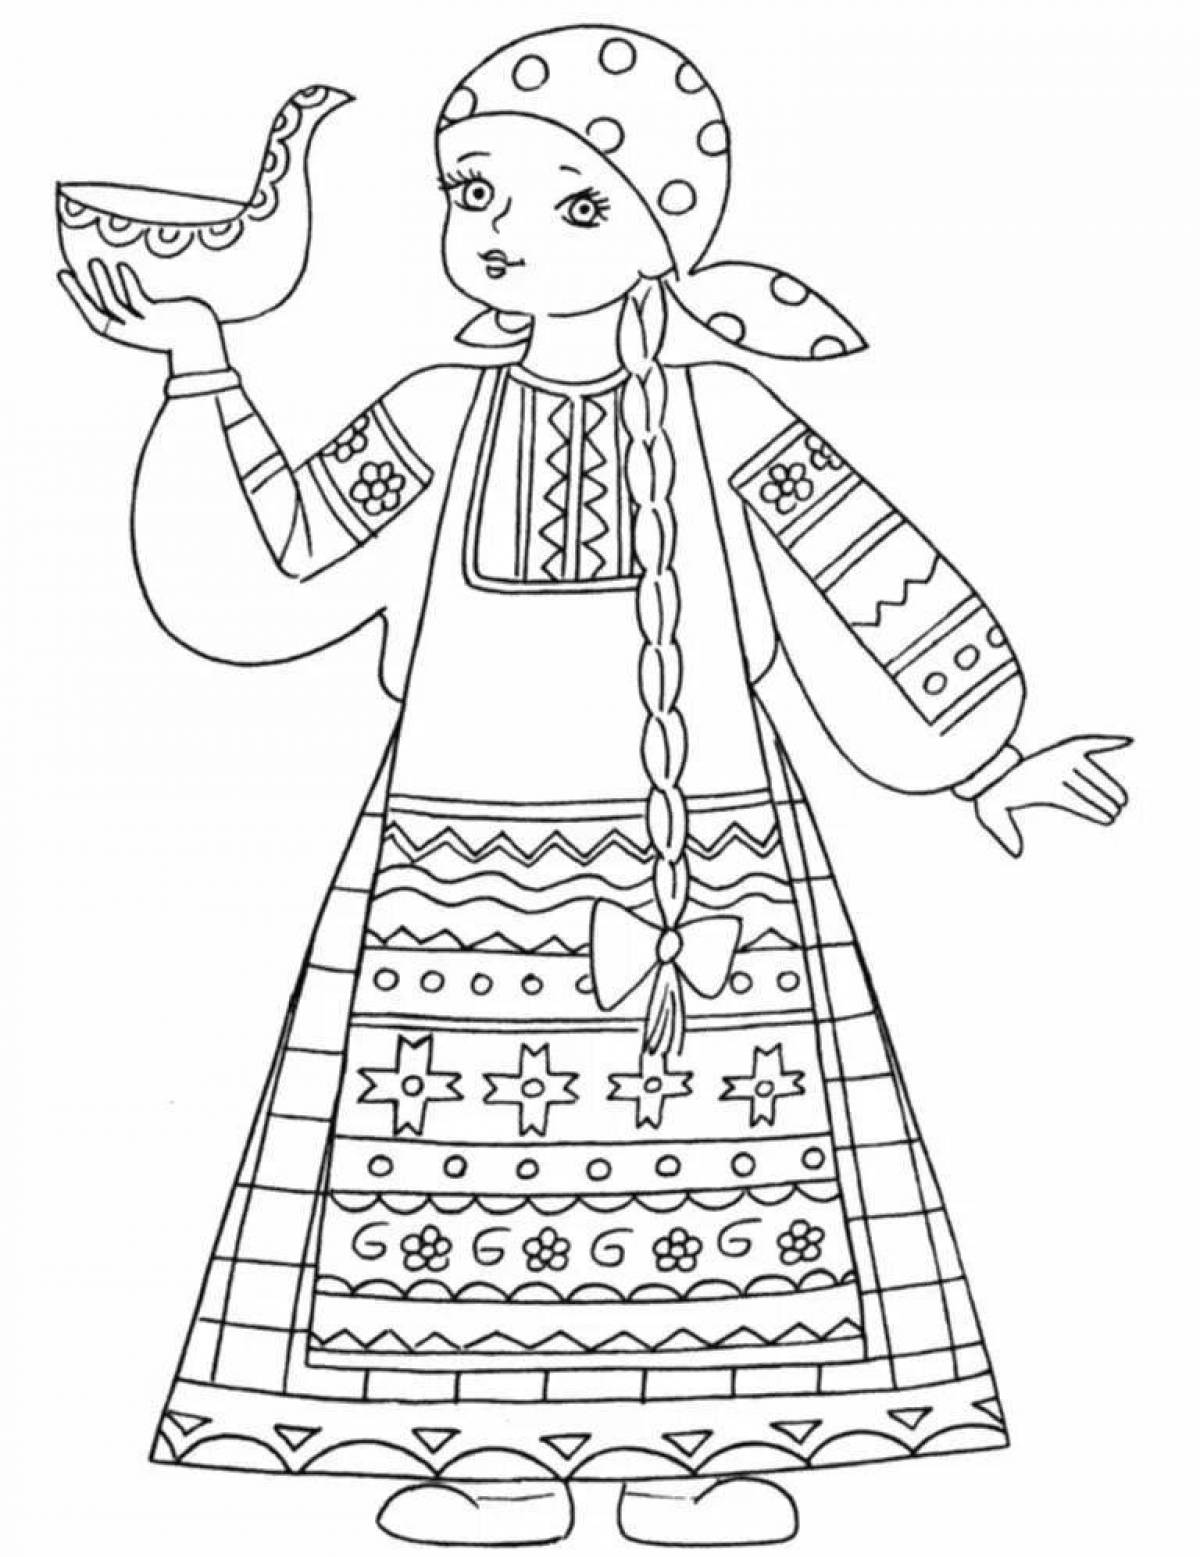 Coloring page dazzling folk costume